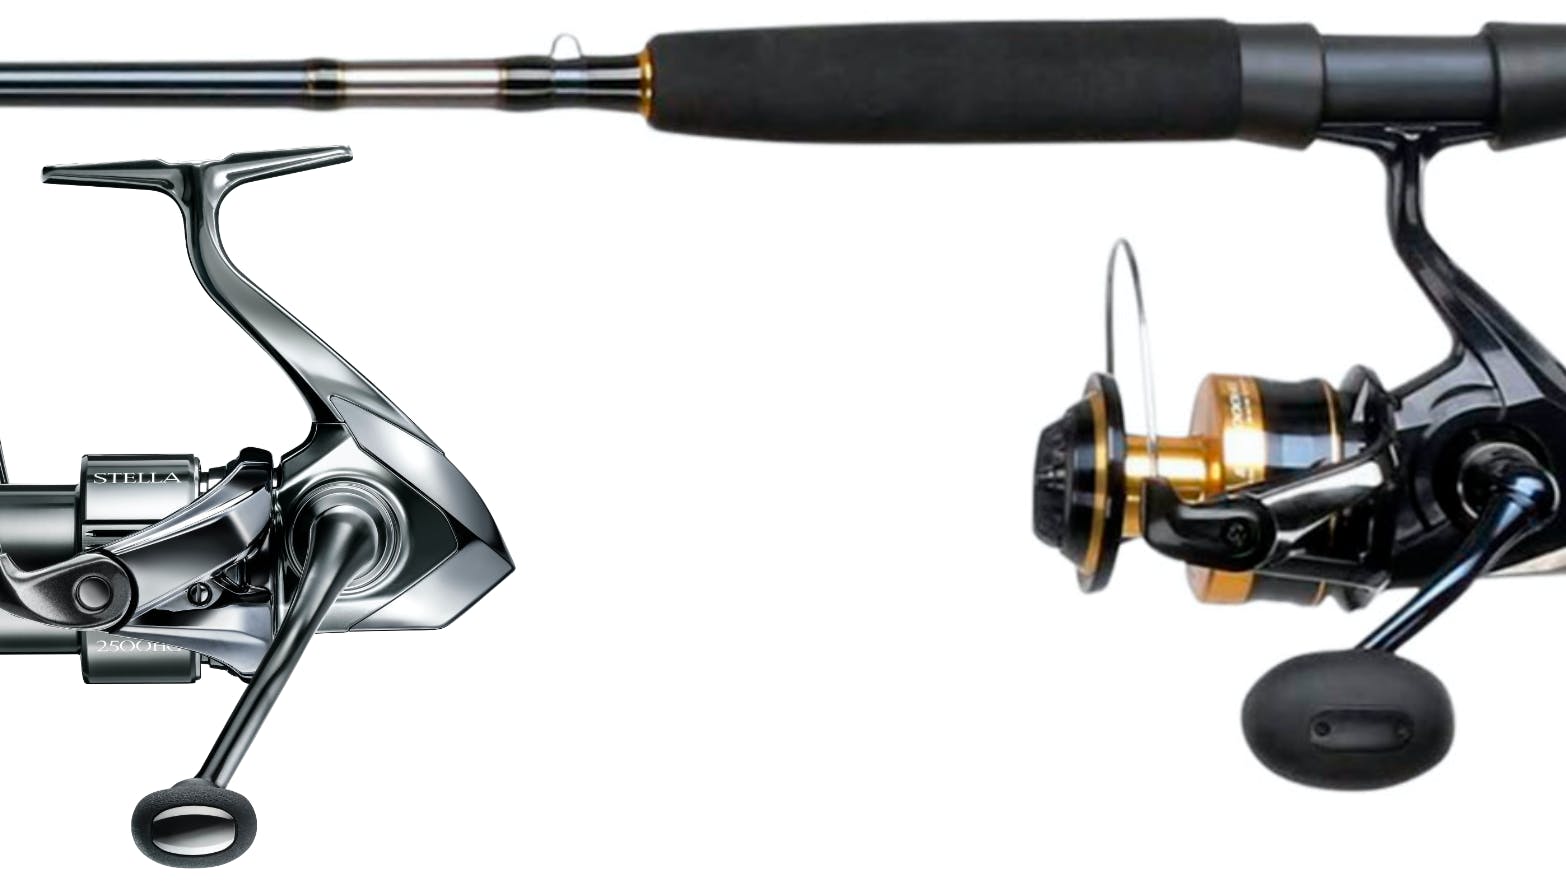 Product images of the Shimano Spheros SW Combo and the Shimano Stella FK.